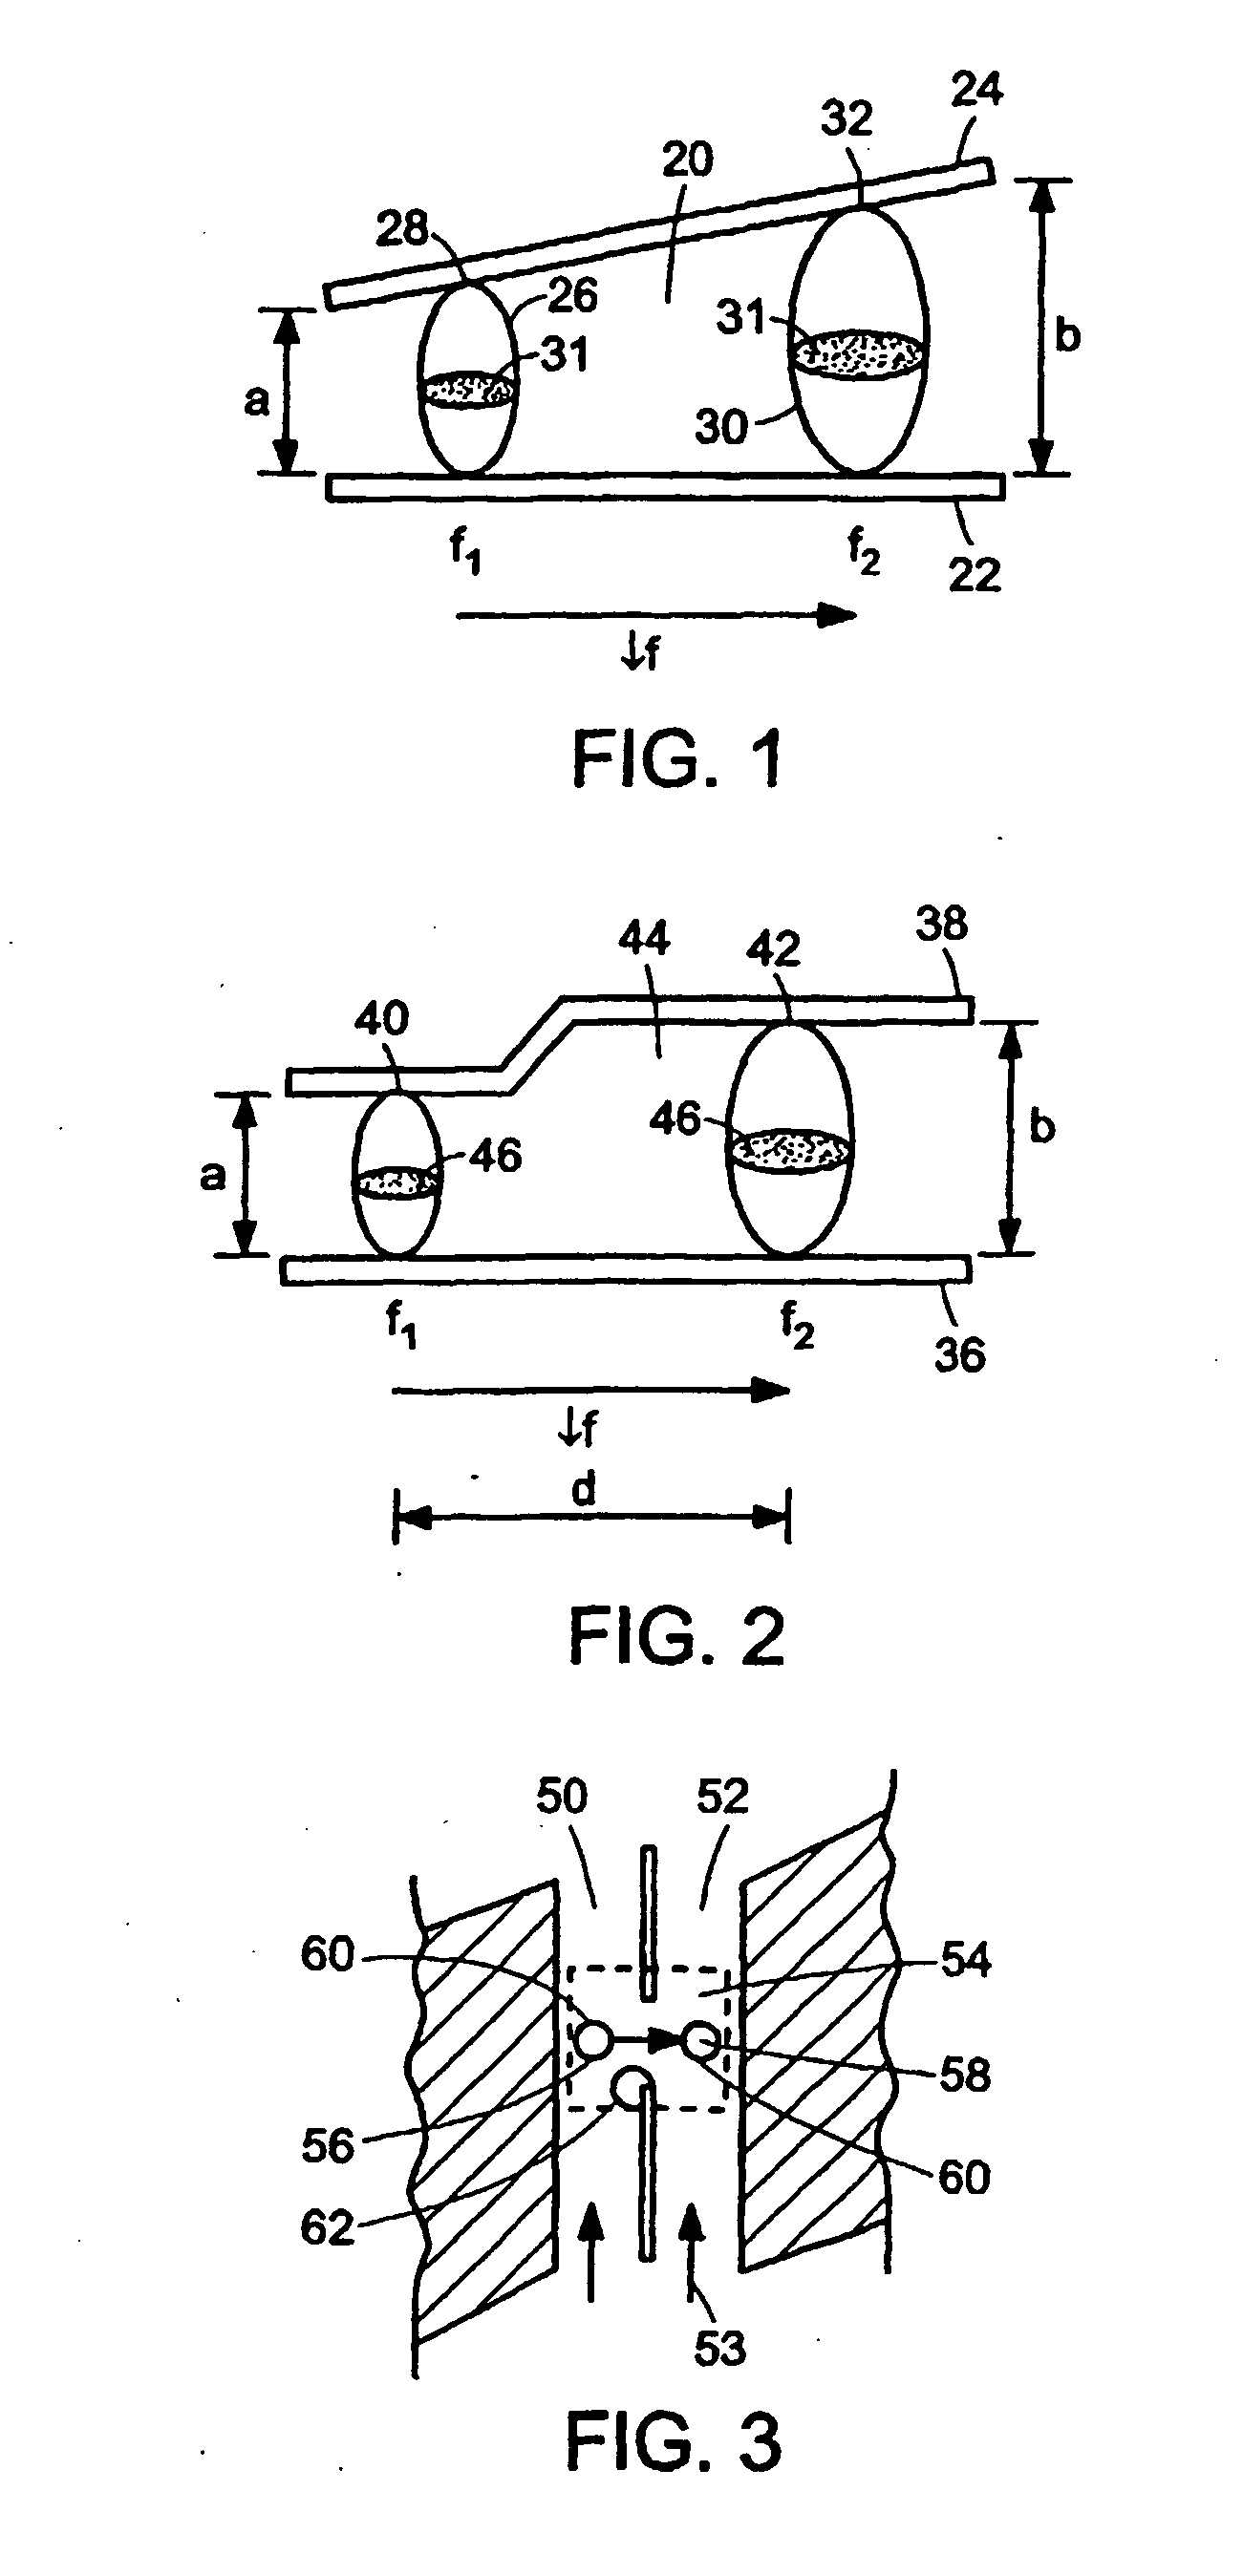 Method and device for ultrasonically manipulating particles within a fluid